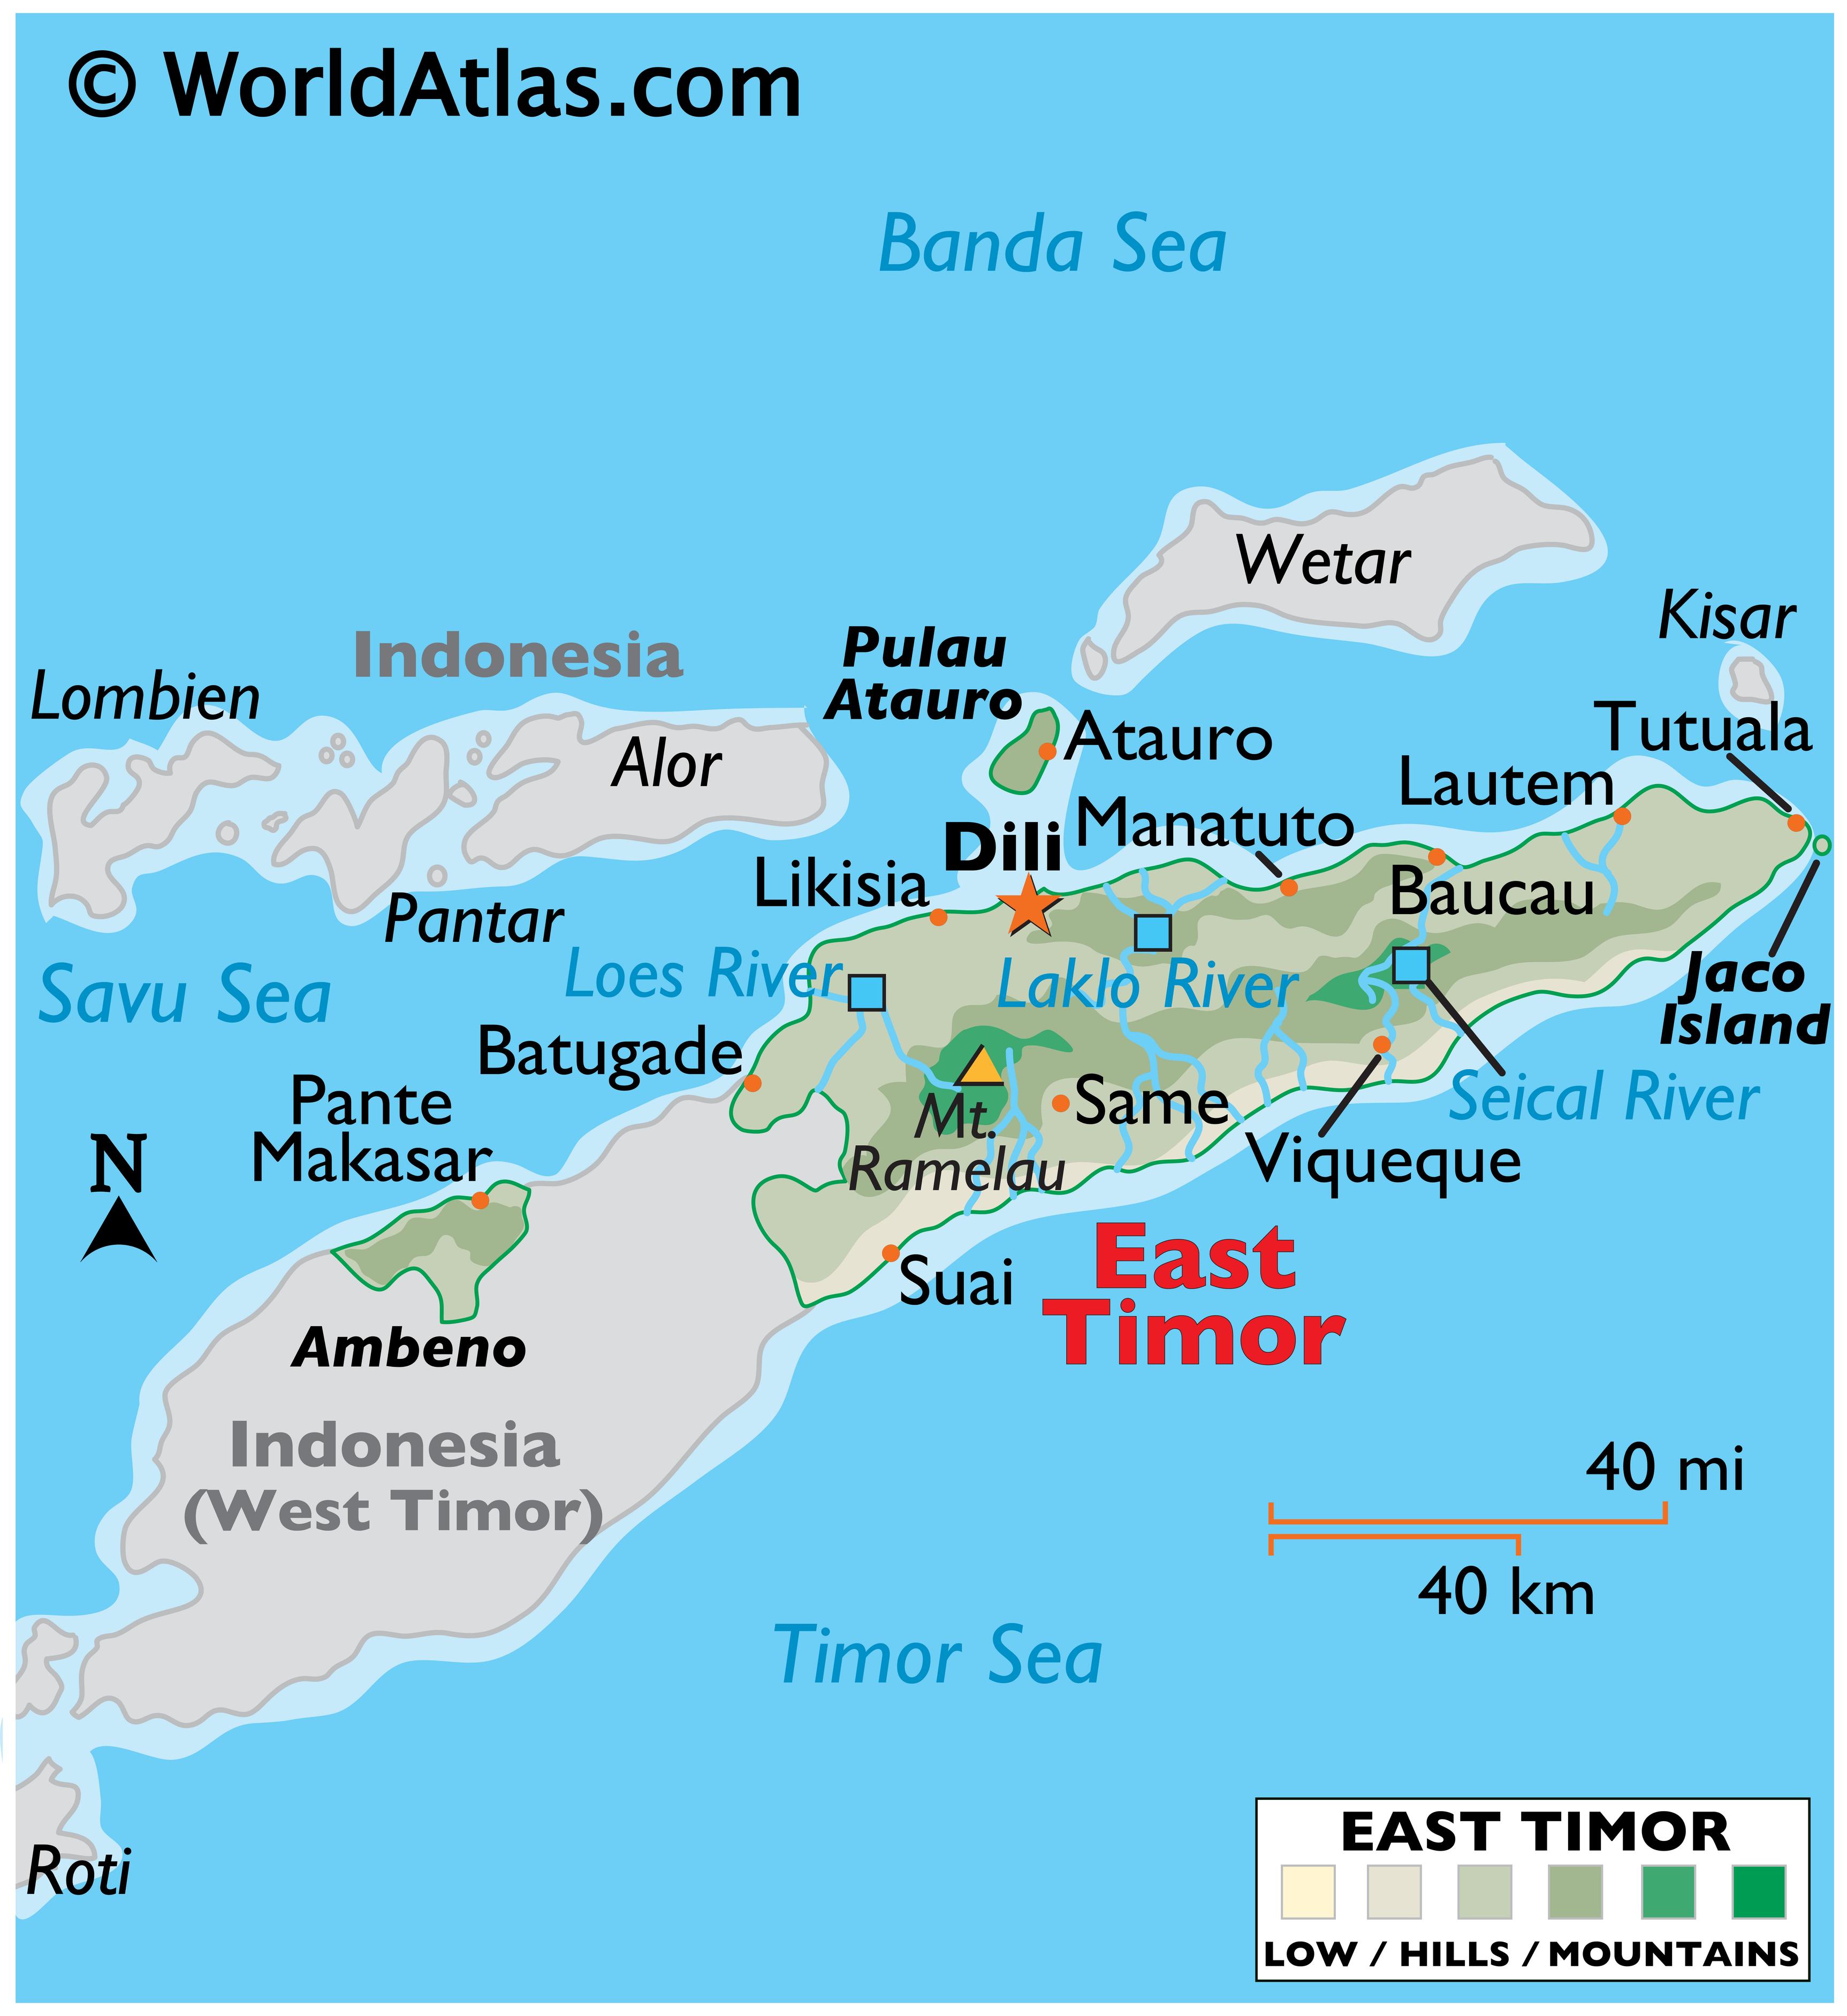 the map of dili east timor